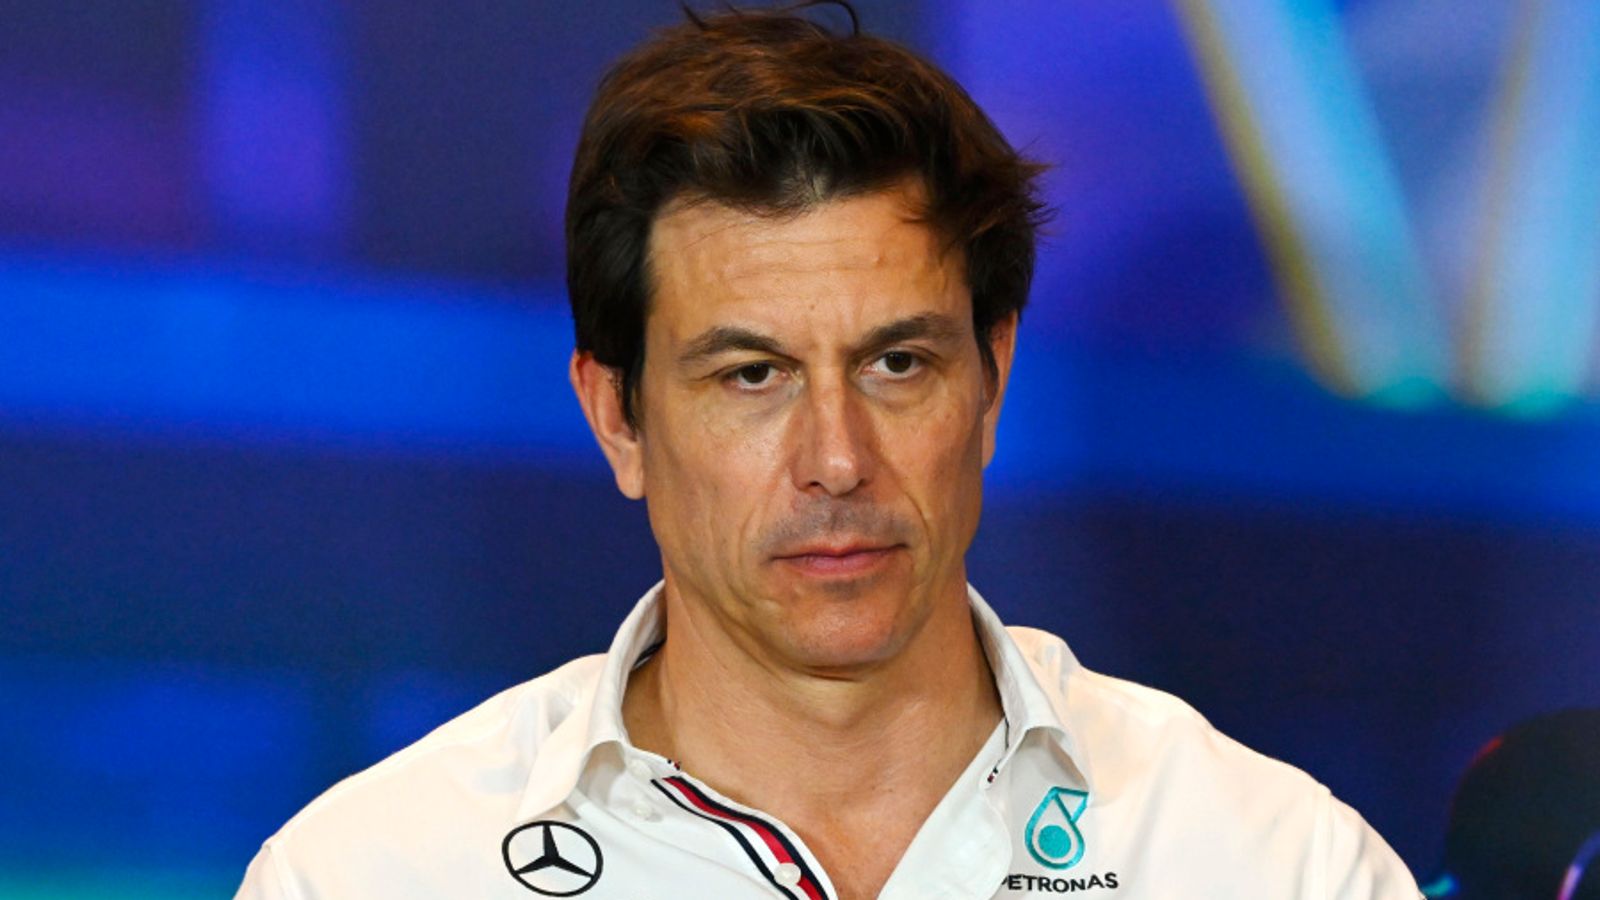 Toto Wolff kicks off 2023 F1 rivalry with playful swipe at Red Bull boss Christian Horner